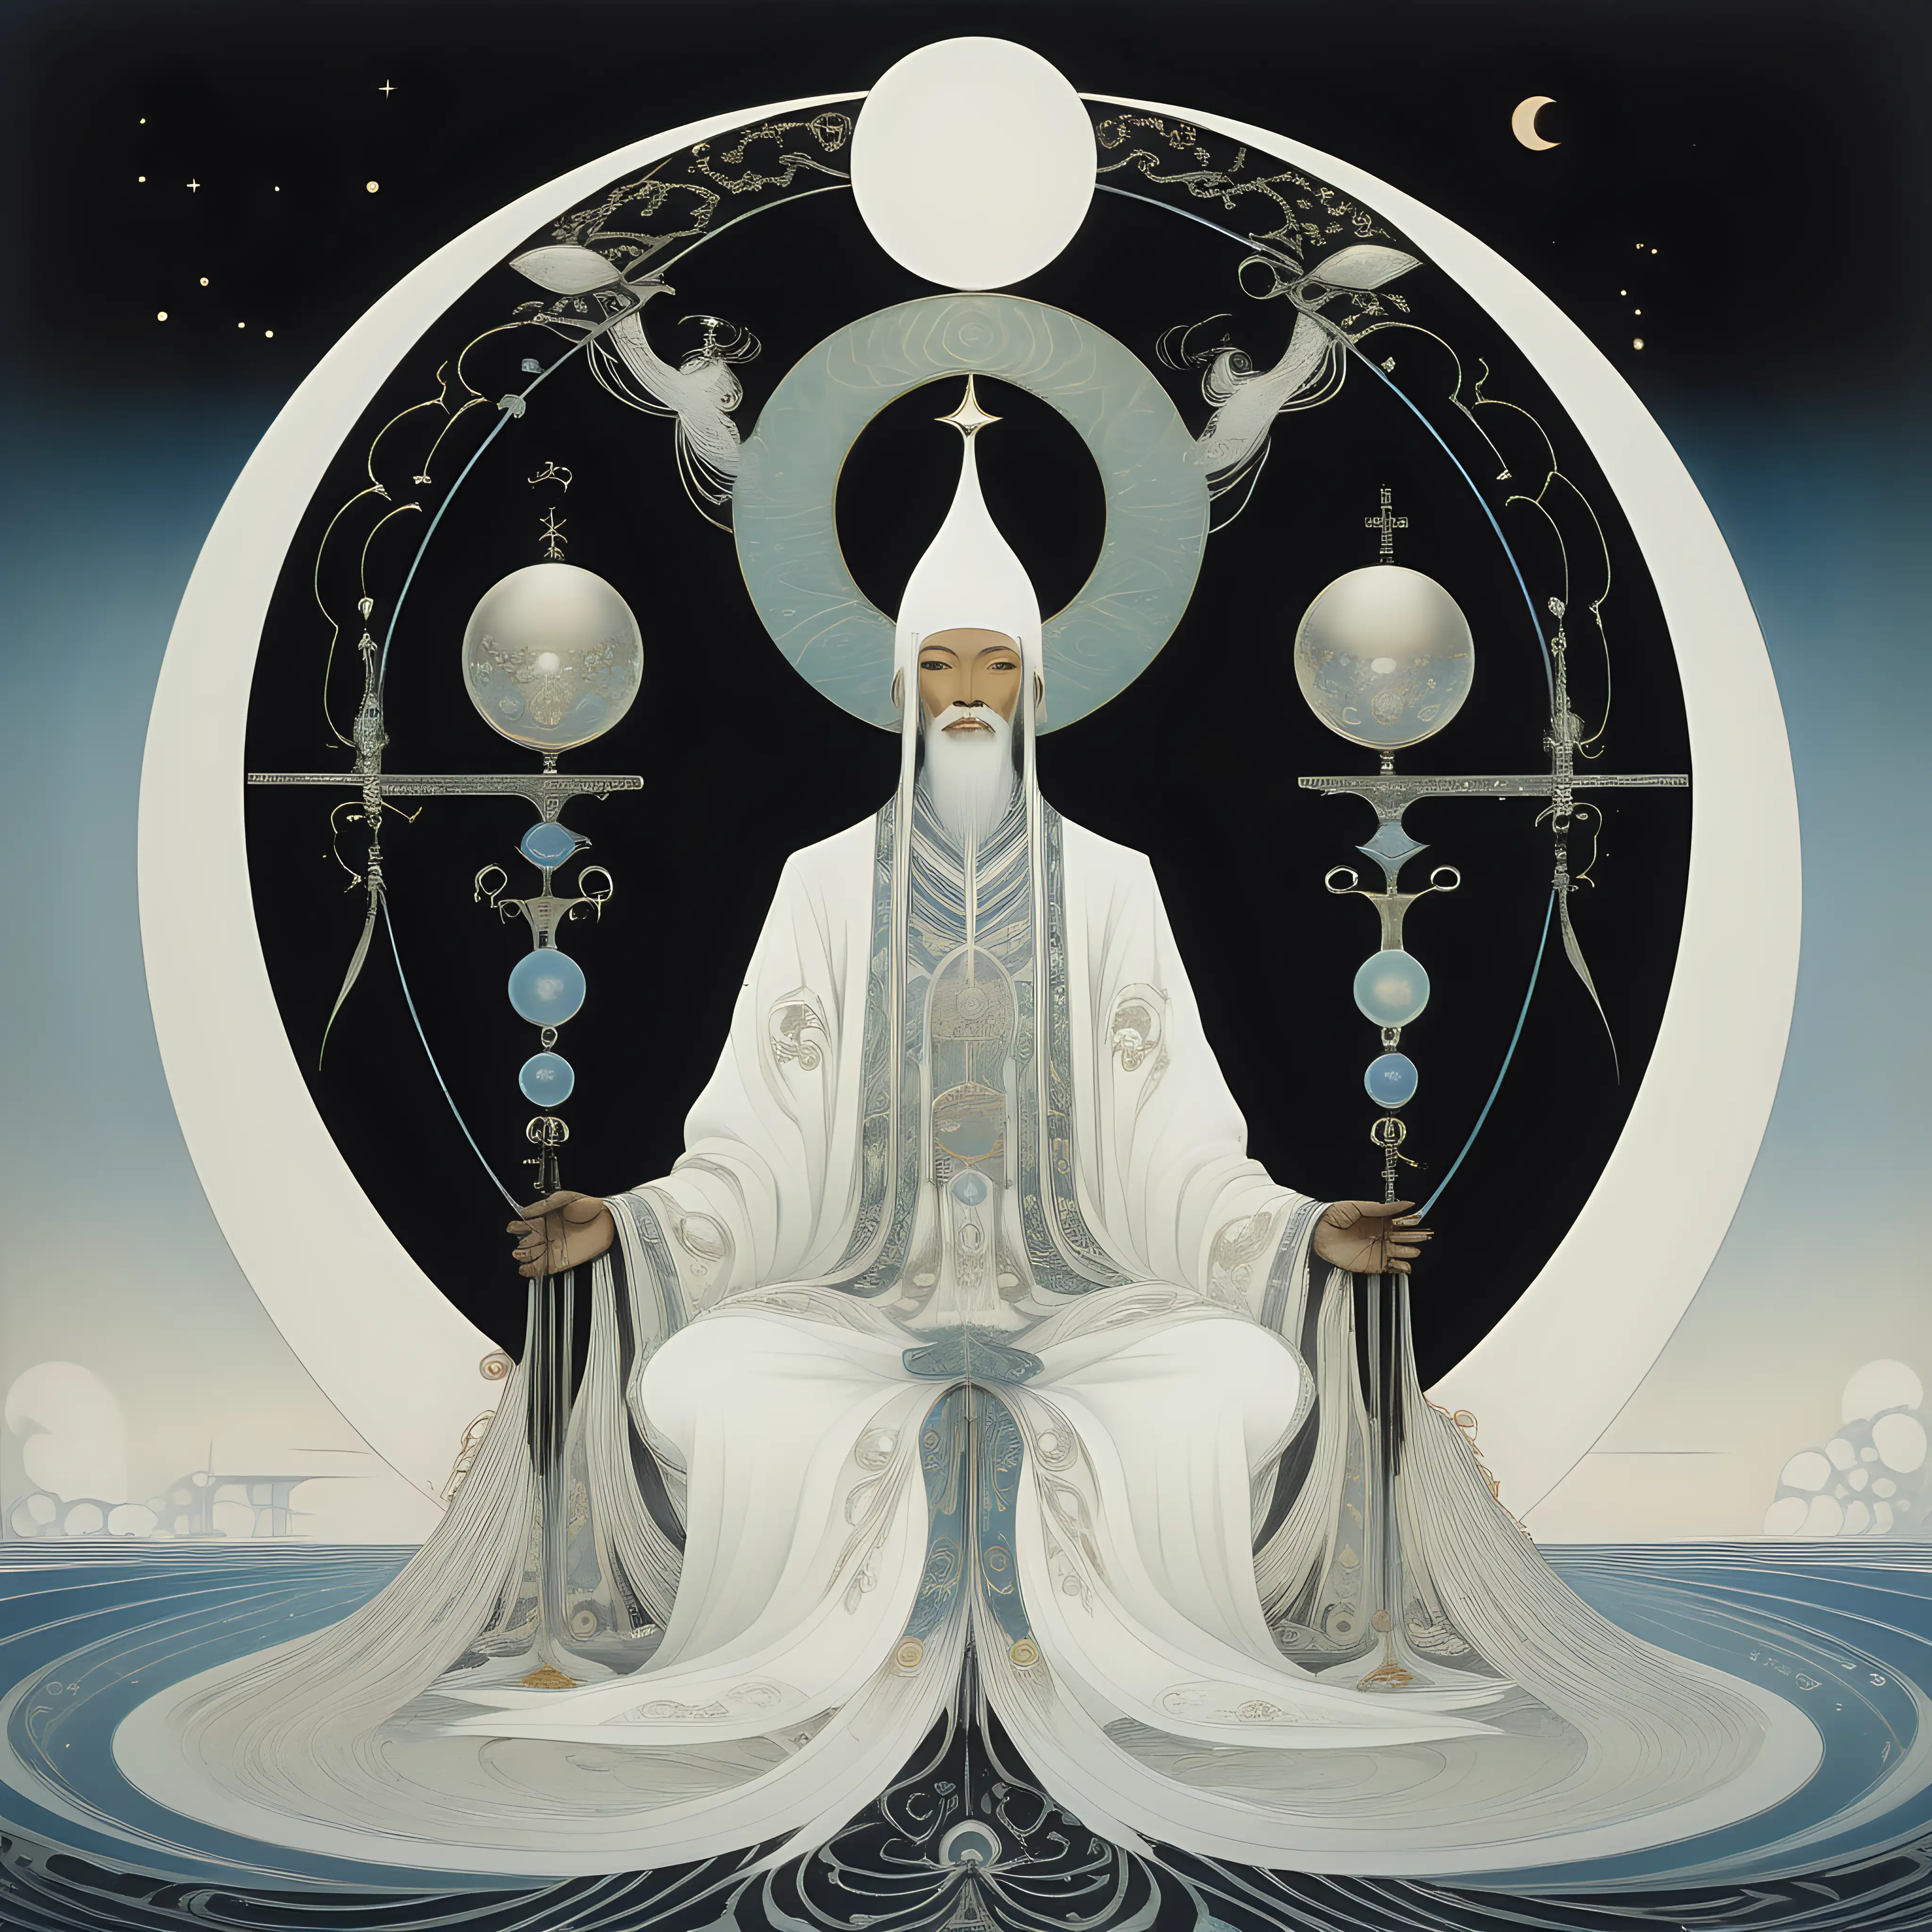 futuristic painting in kay nielsen style of a holy trinity of asian race, males